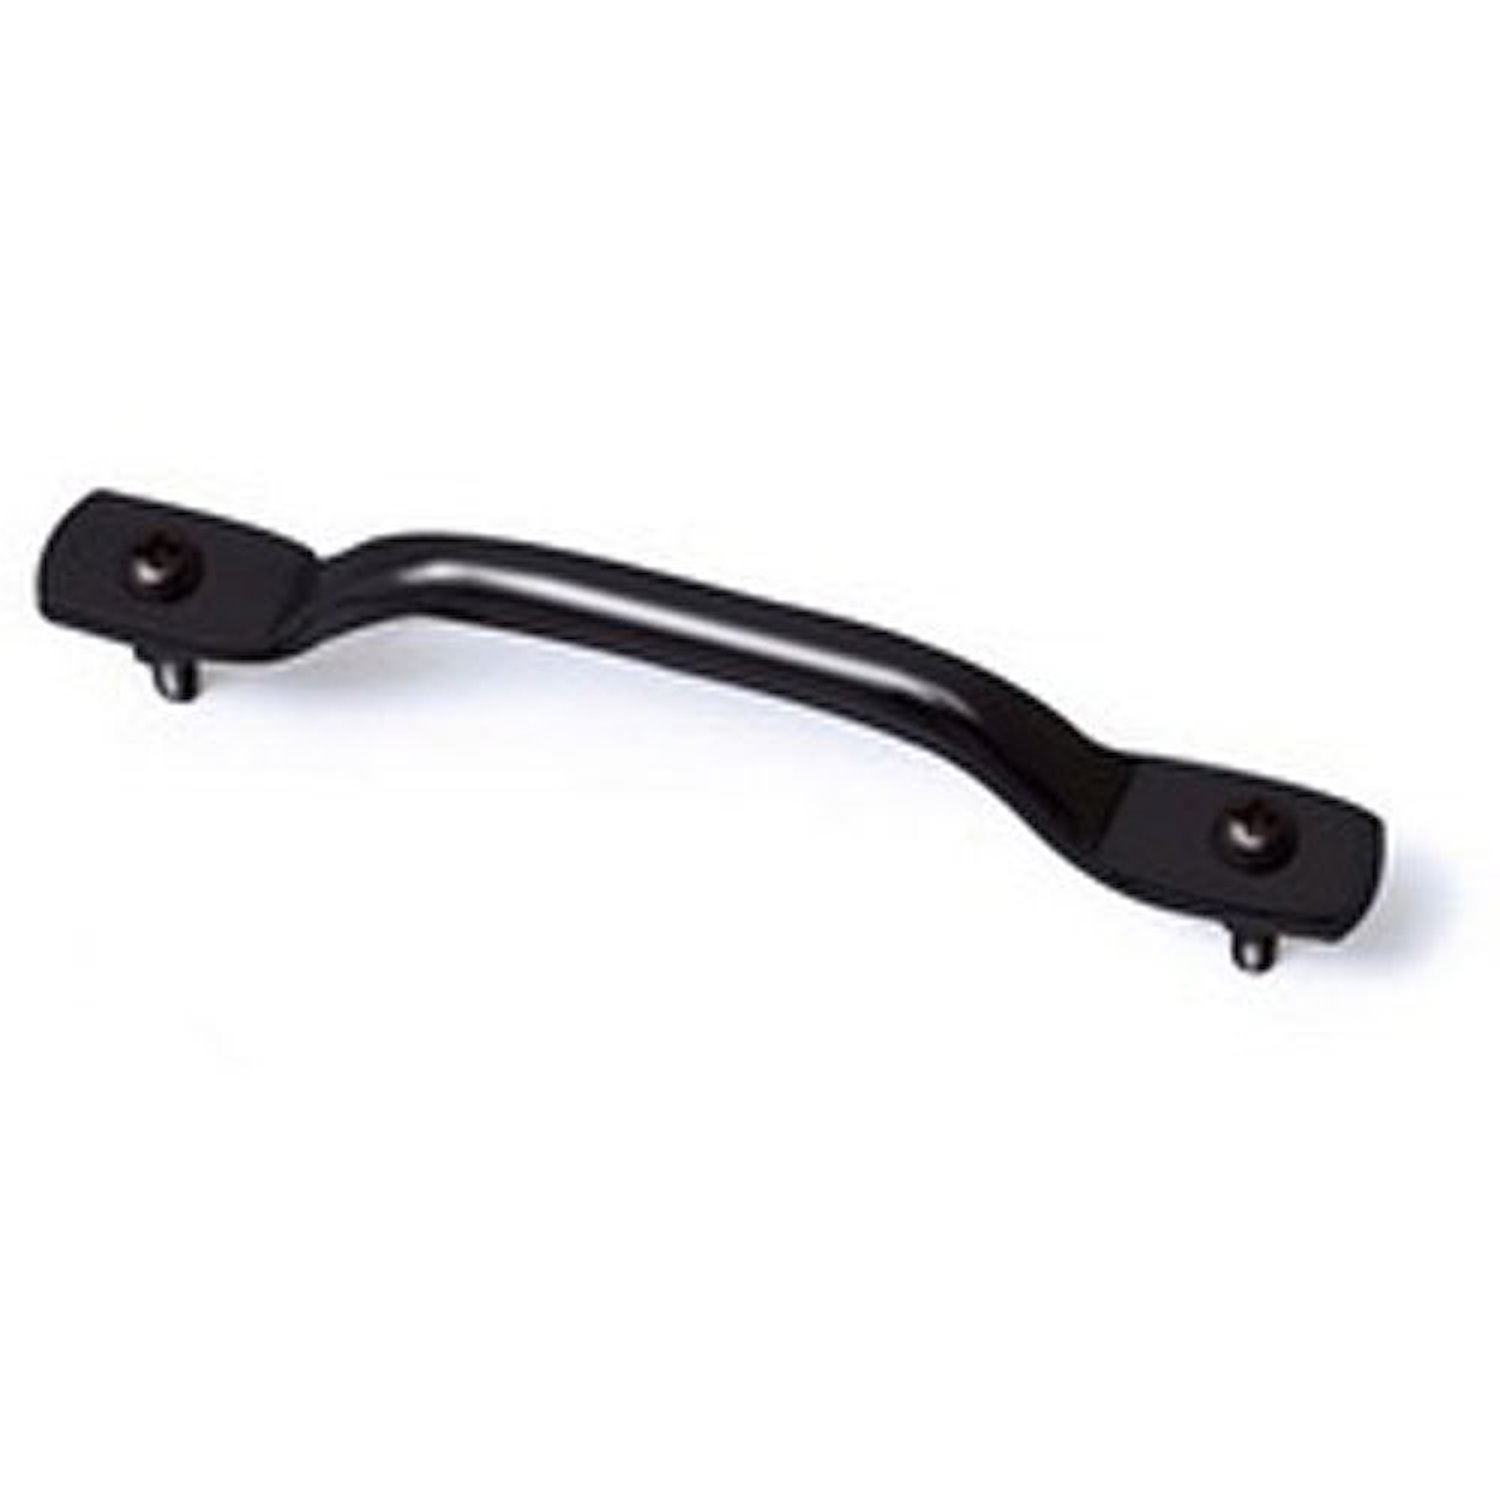 This black long footman loop from Omix-ADA fits 87-95 Jeep Wrangler YJ.